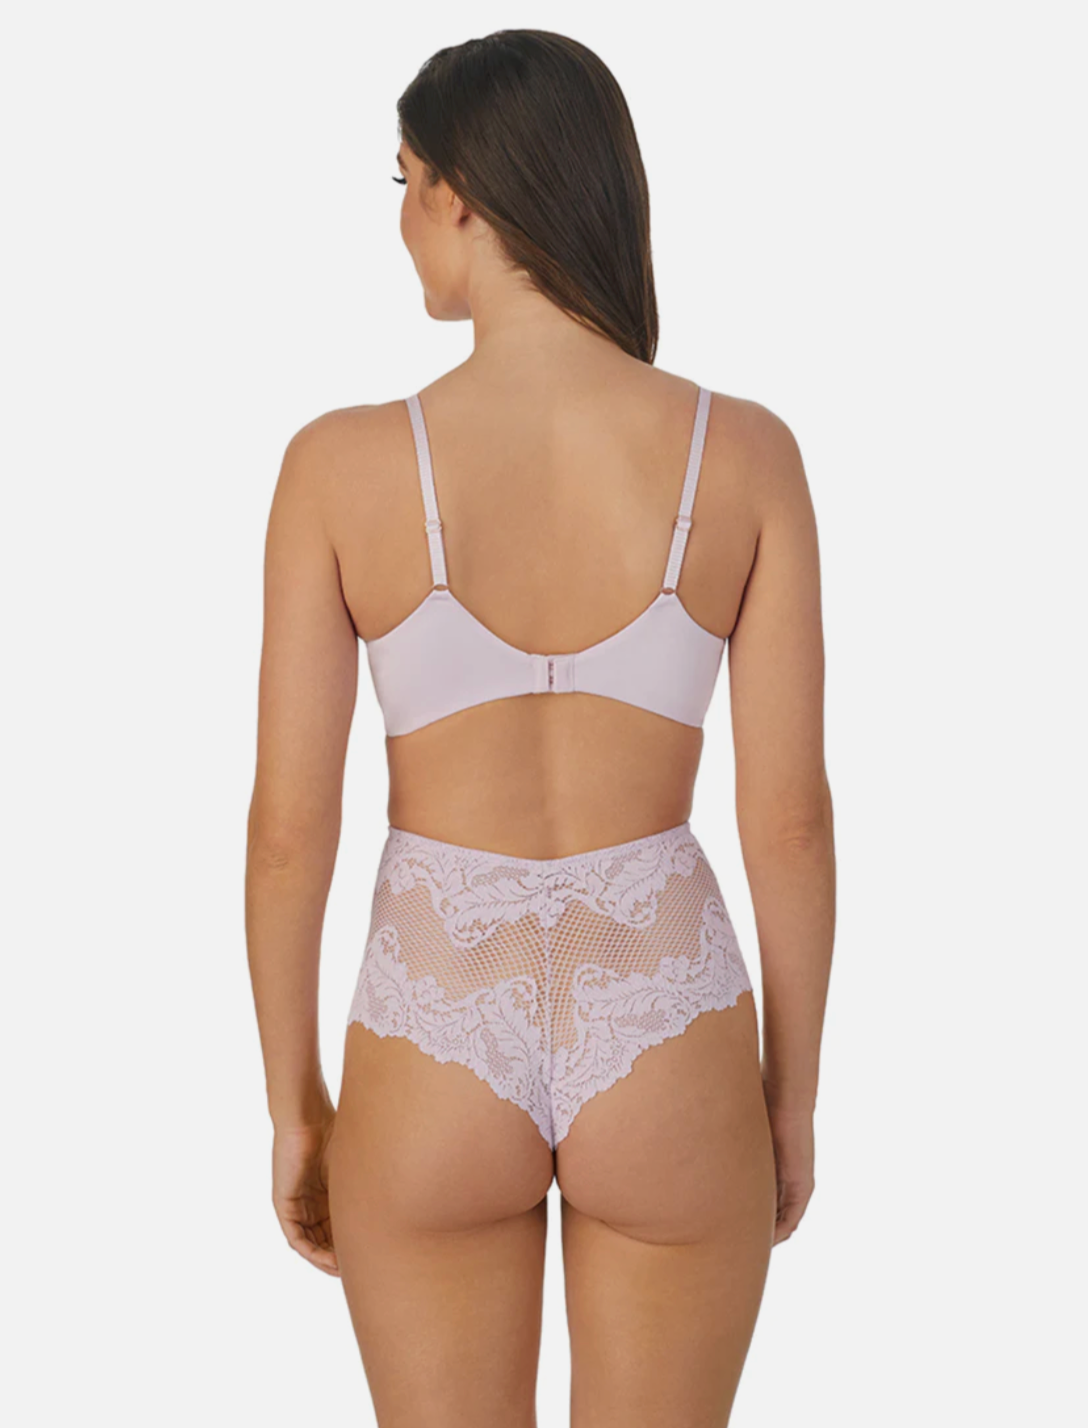 LeMystere Lace Allure High Waist Thong